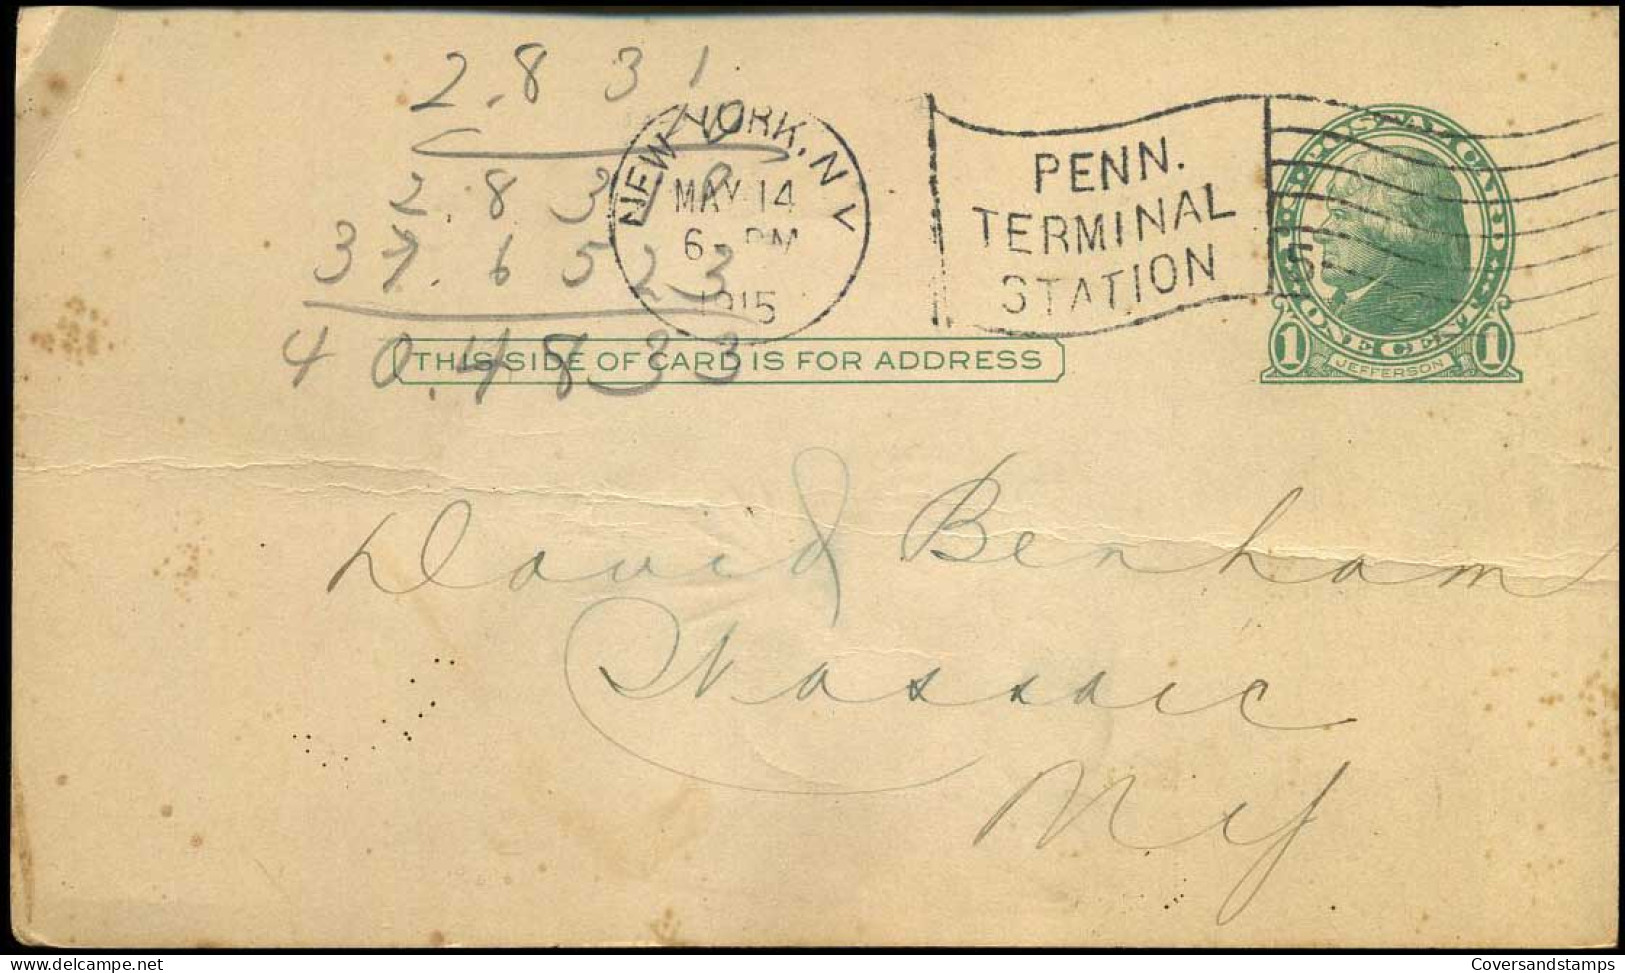 Postal Stationary - From New York, N.Y. - 1901-20